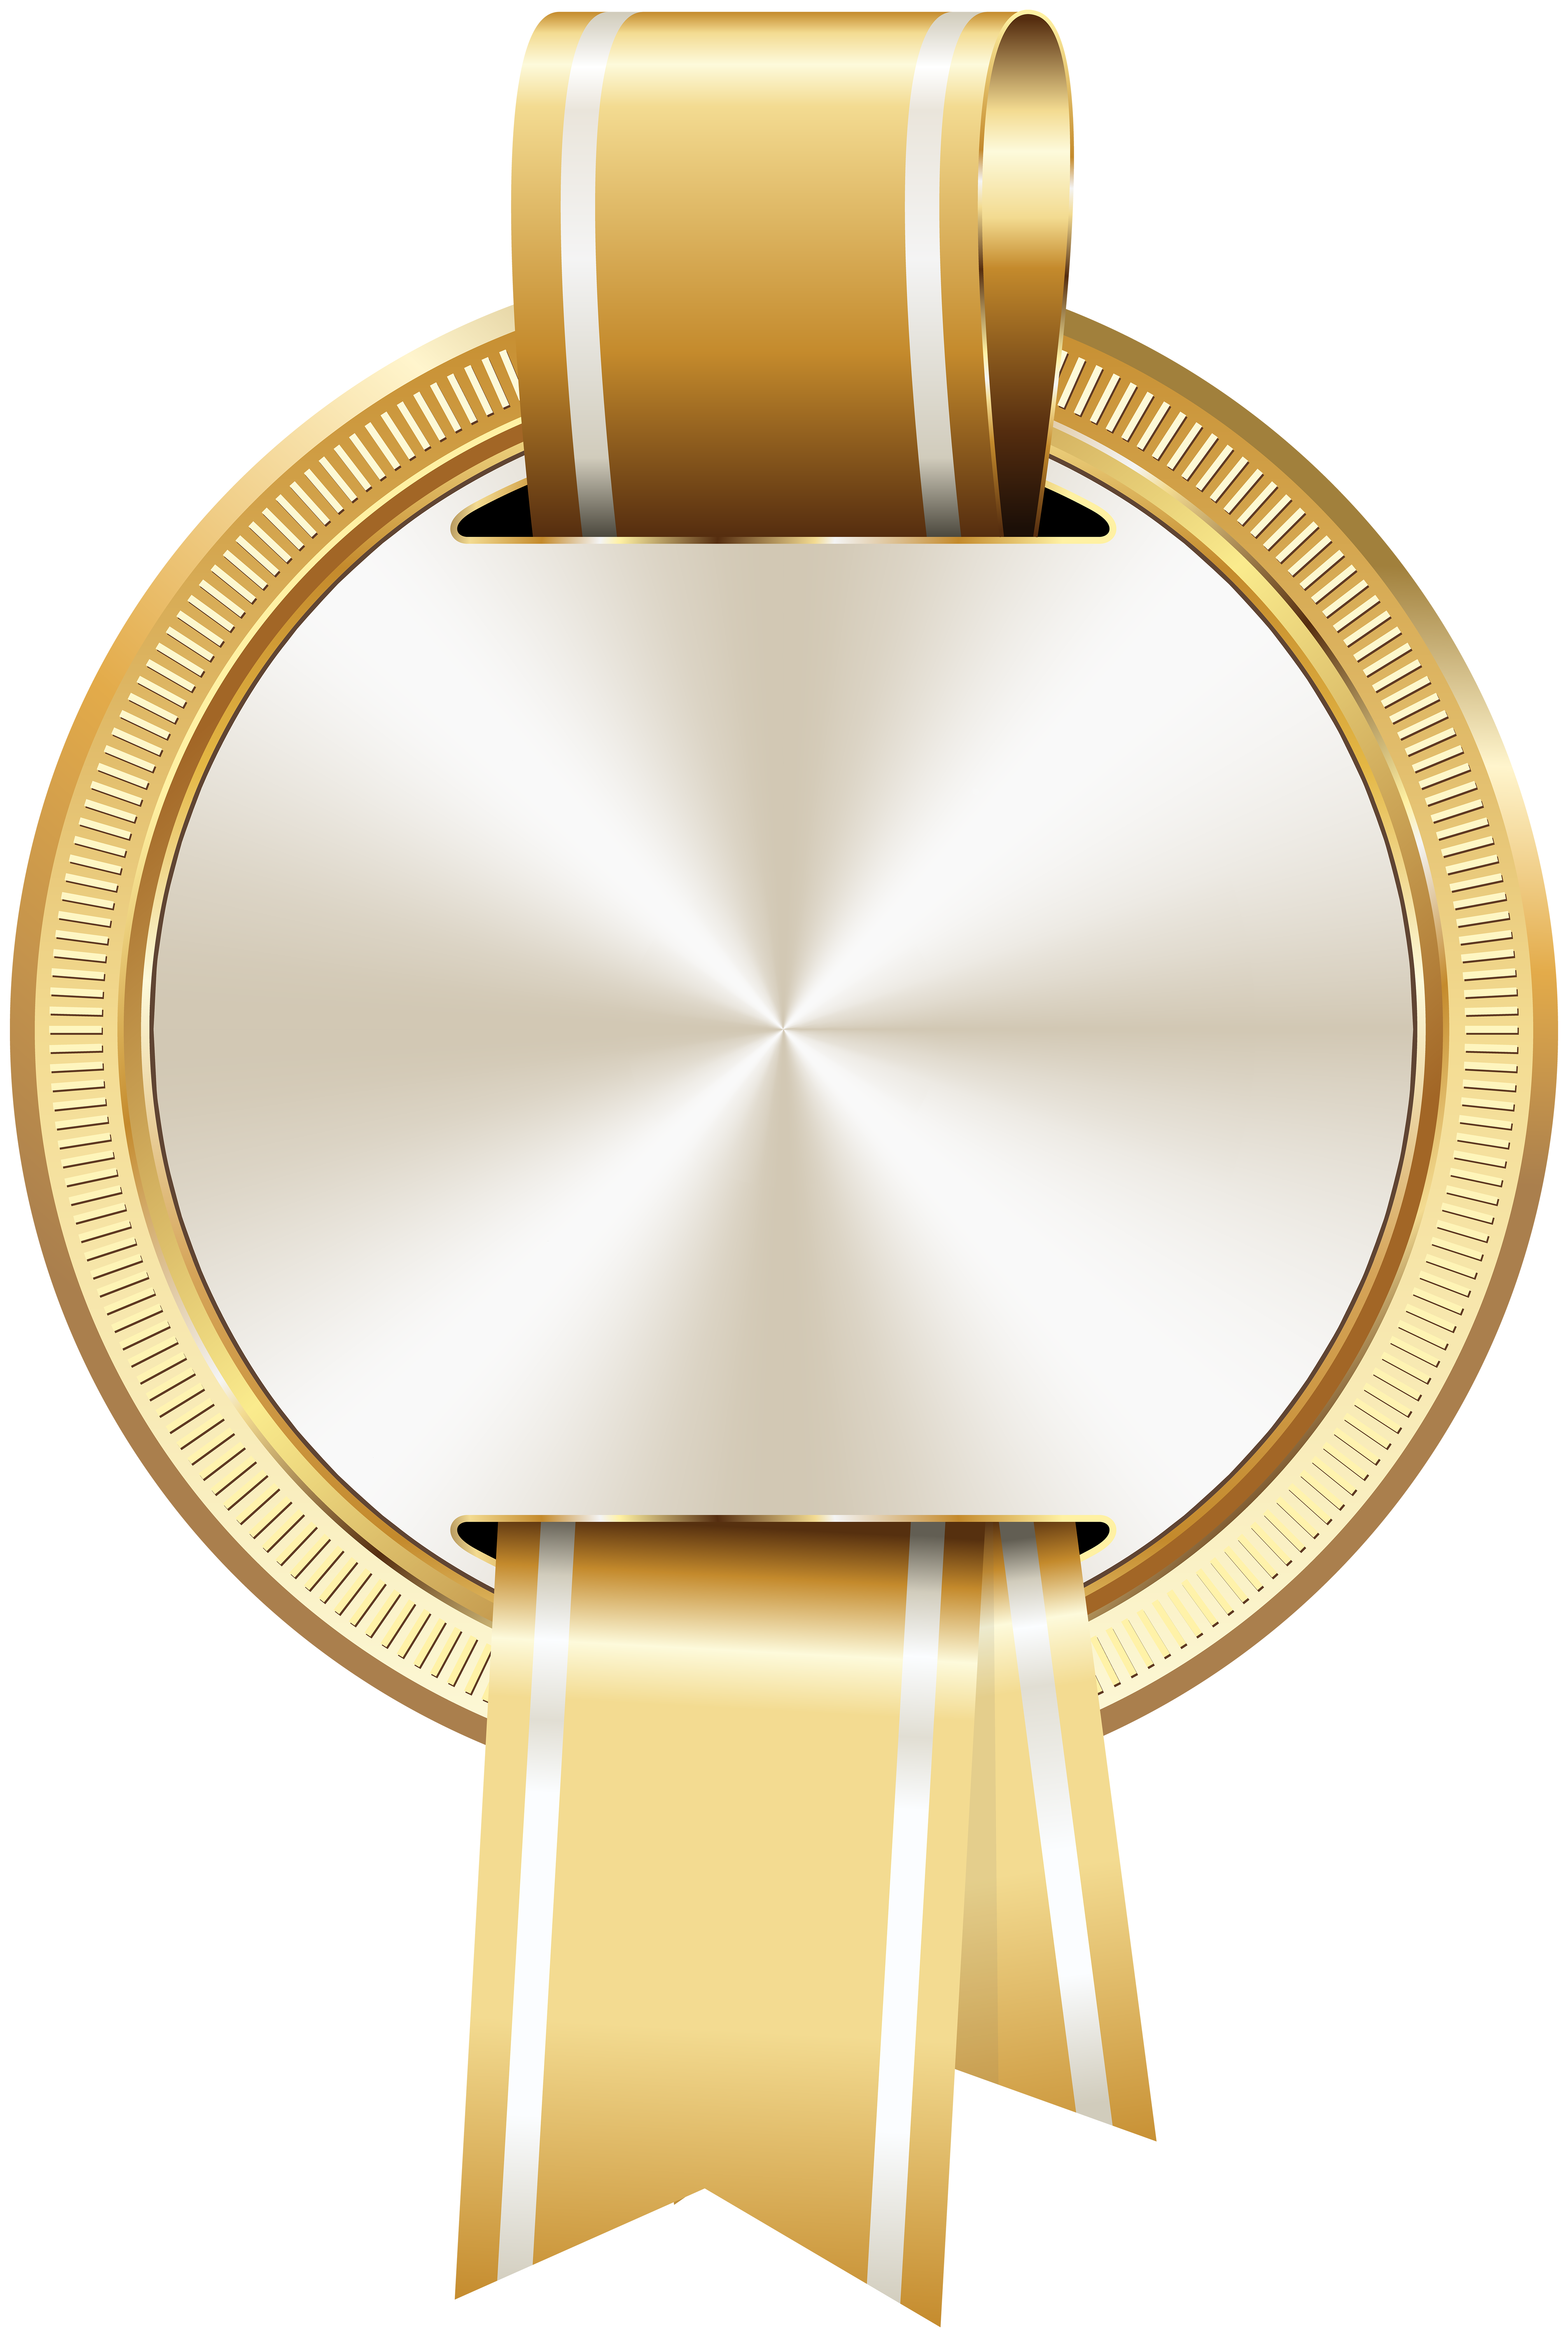 Seal Badge Gold White PNG Clip Art Image.